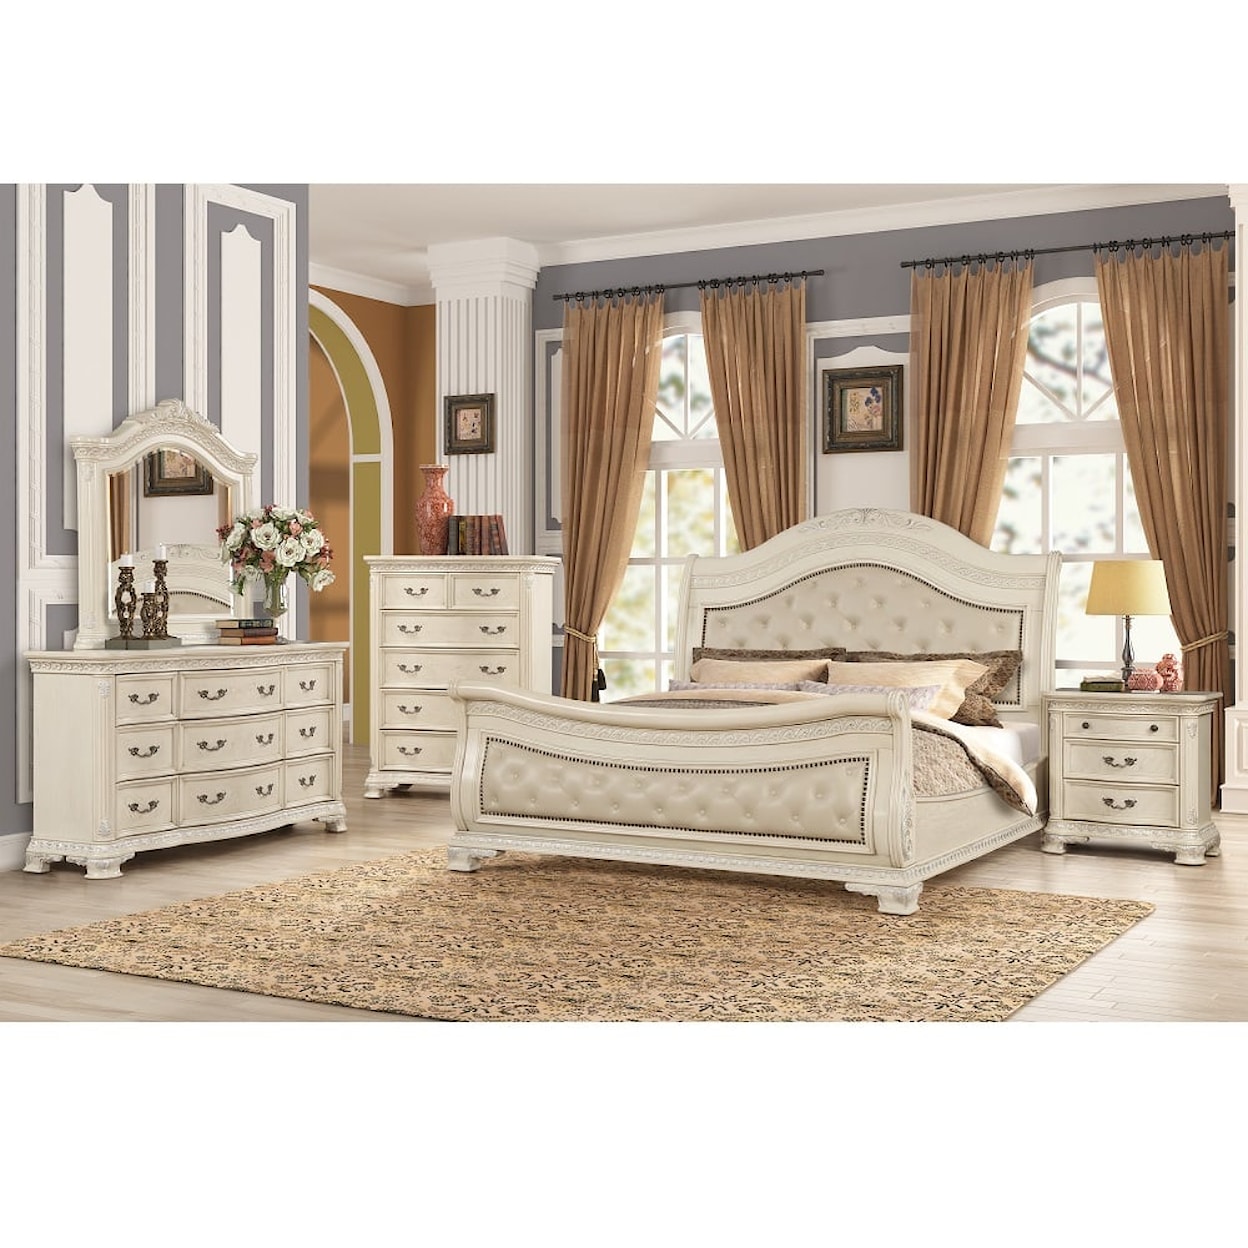 Acme Furniture Akane Queen Bed